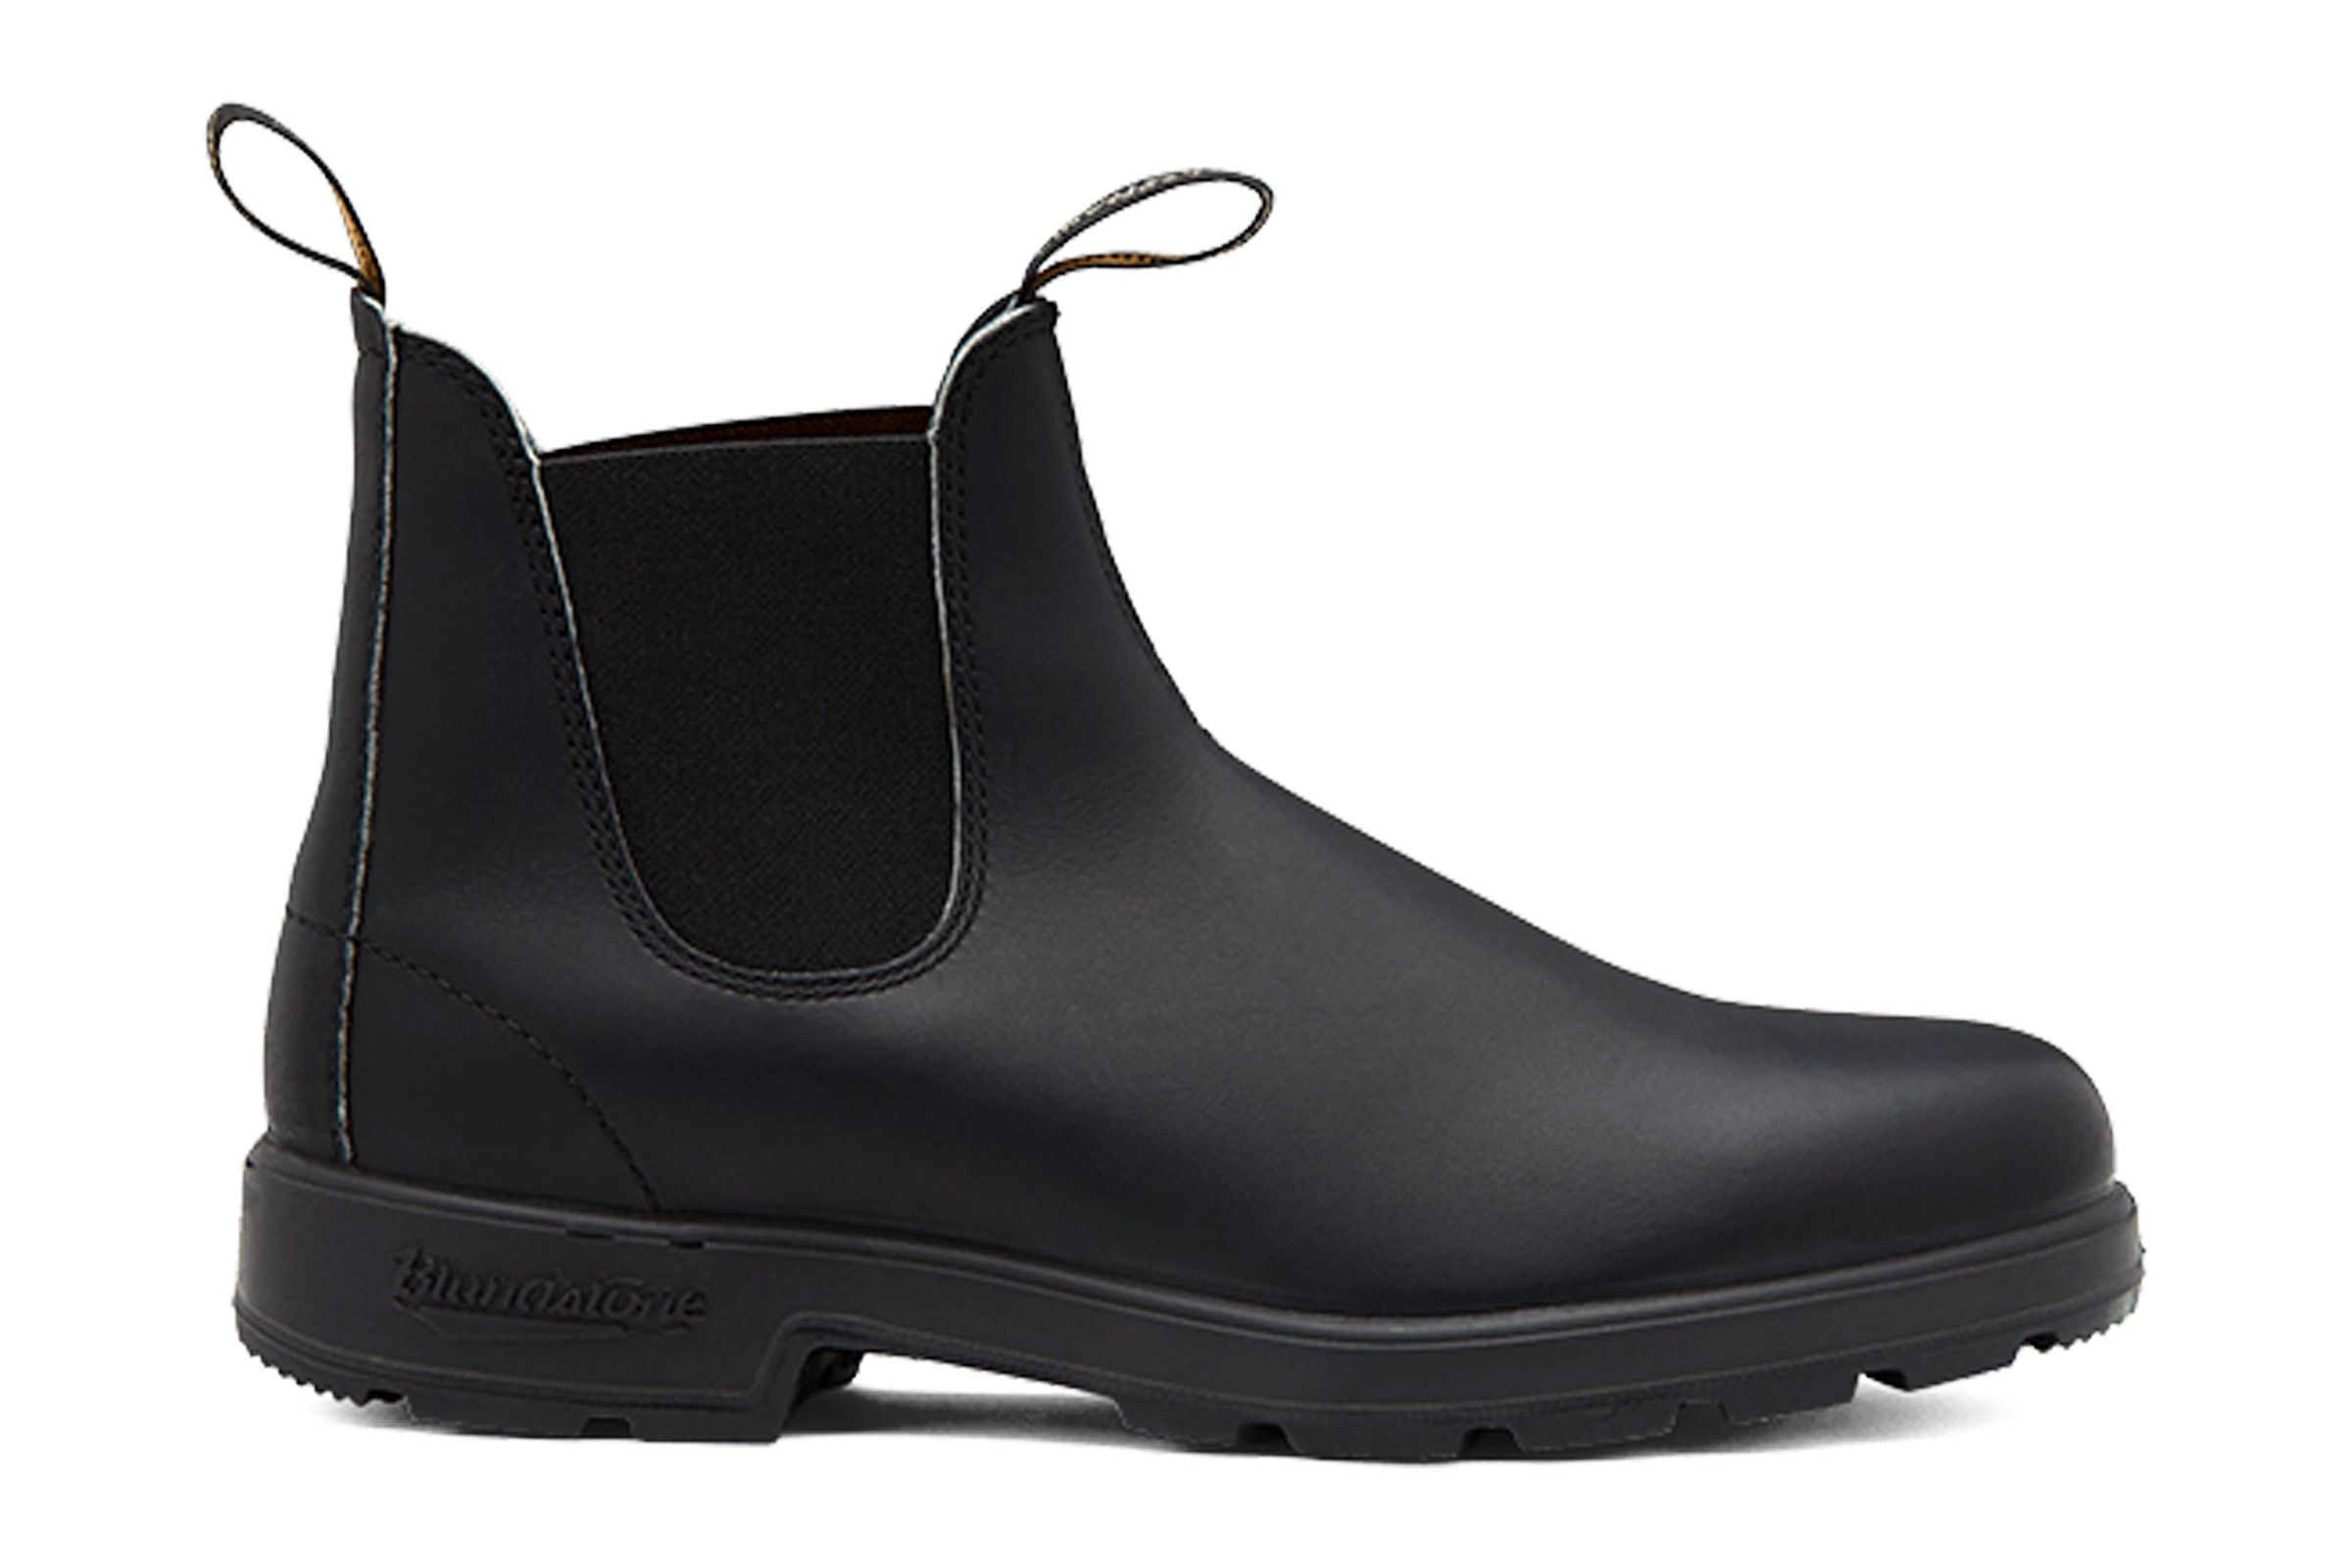 Blundstone 500 Leather Chelsea Boot